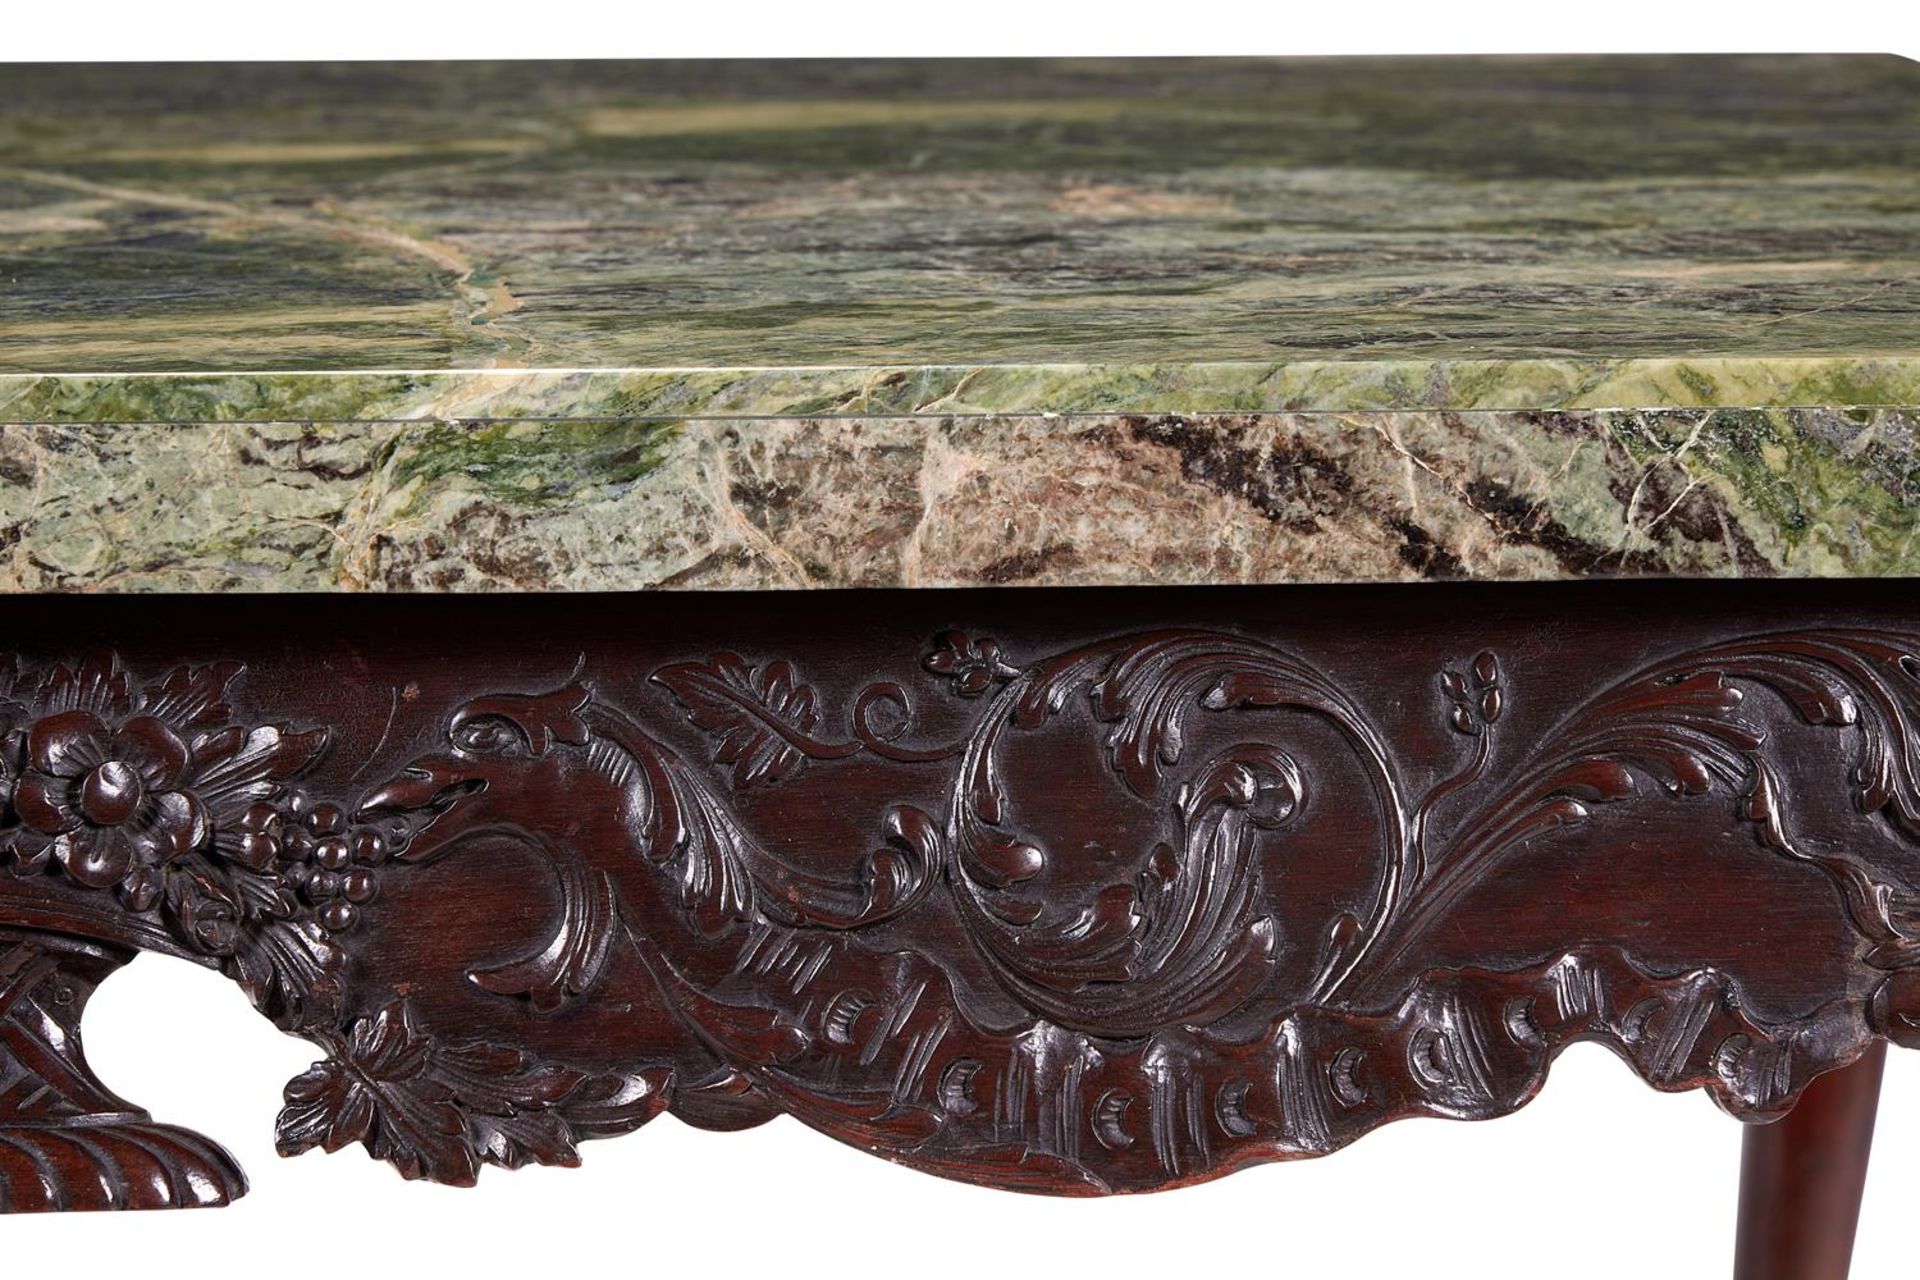 A CARVED MAHOGANY CONSOLE TABLE IN THE GEORGE II IRISH STYLE, LATE 19TH CENTURY - Image 3 of 5